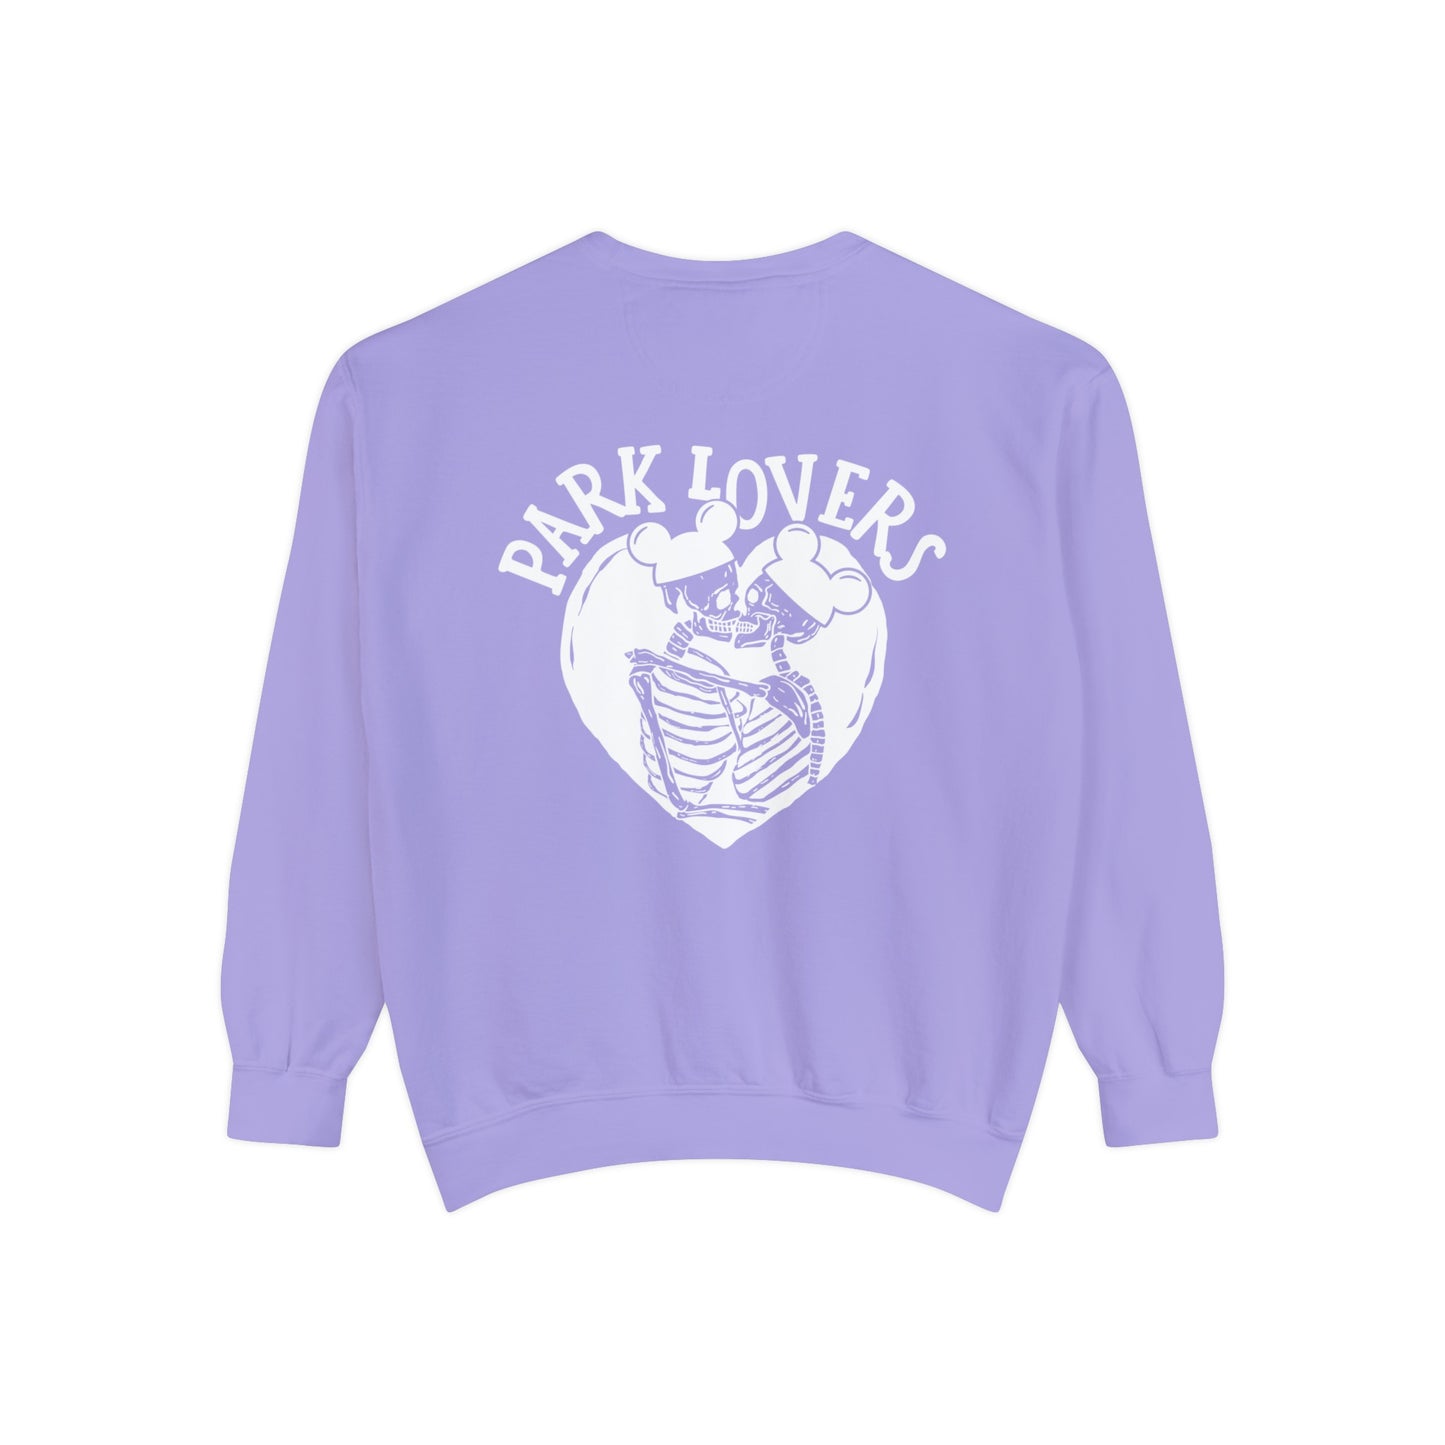 Park Lovers - Washed Lilac Crew